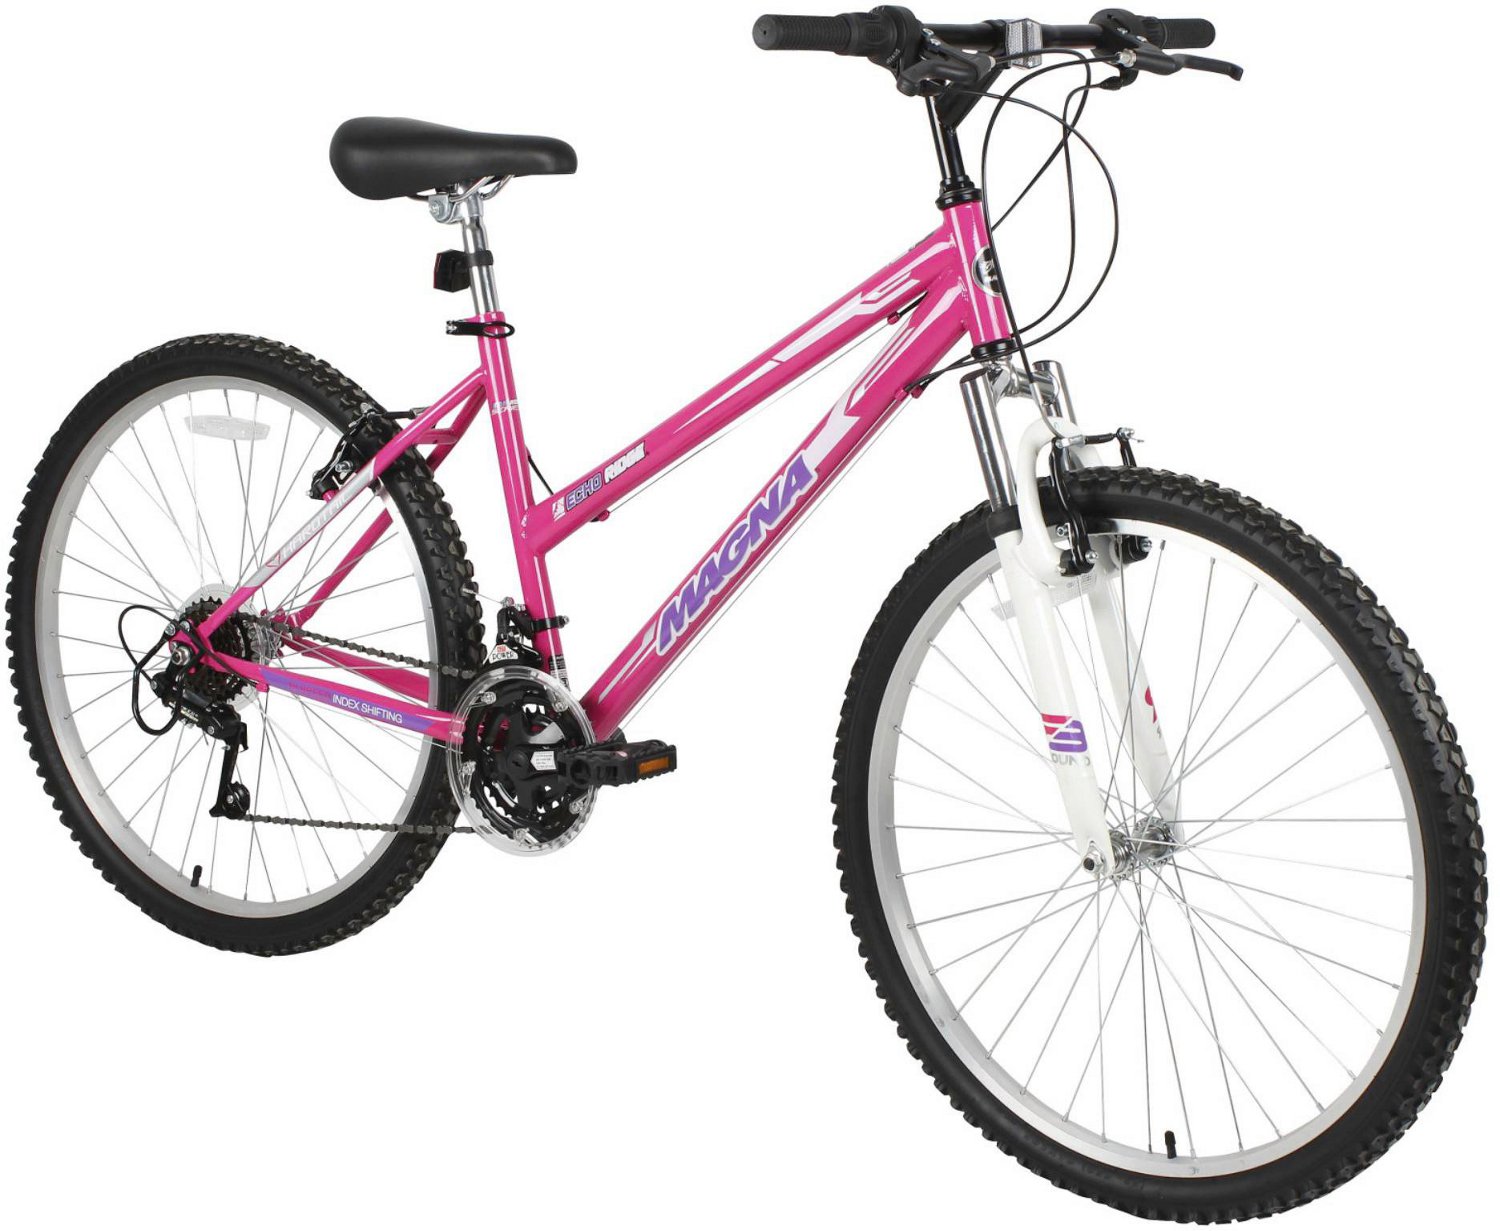 academy sports women's bicycles